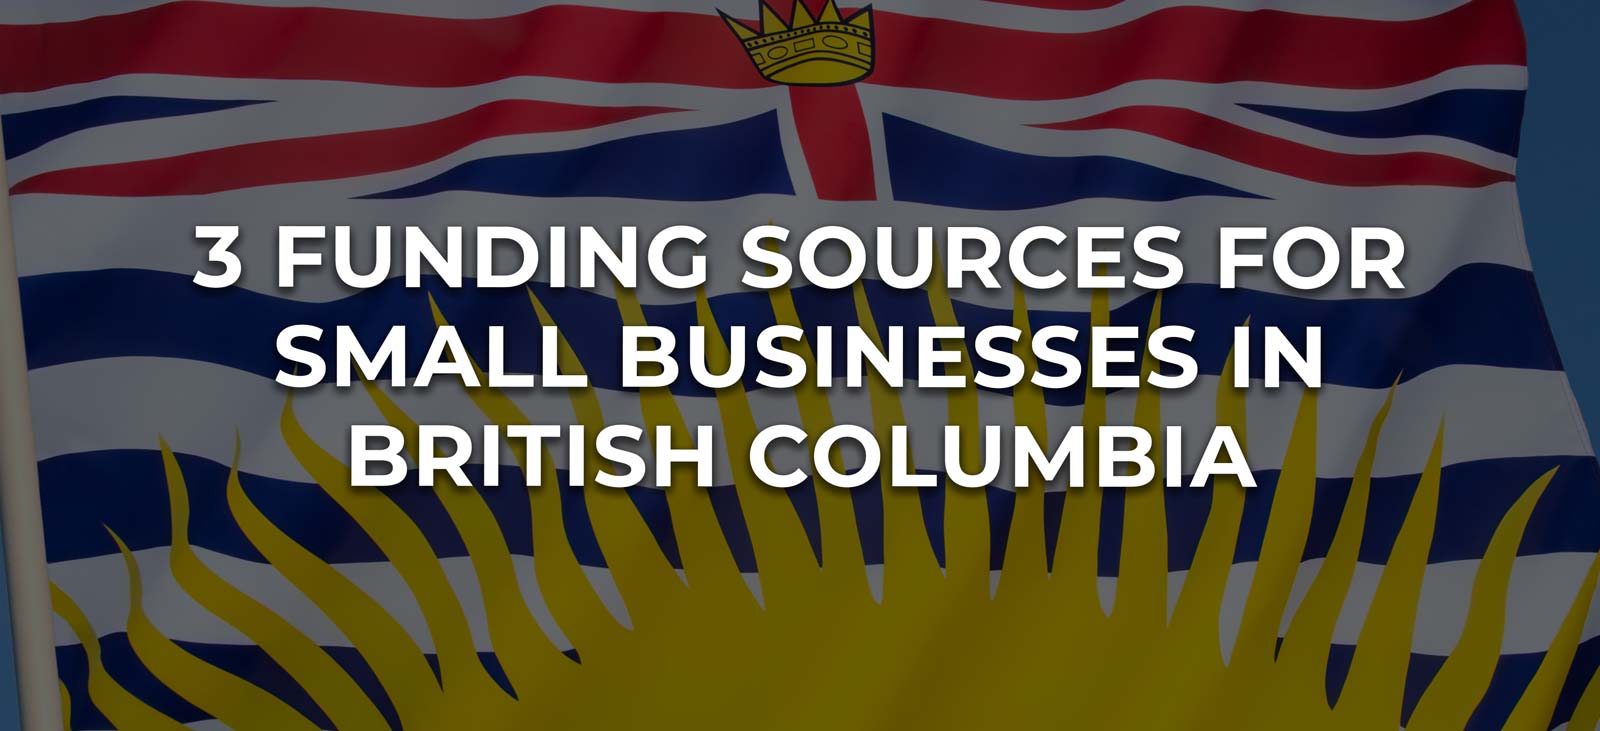 Funding sources for small business in British Columbia